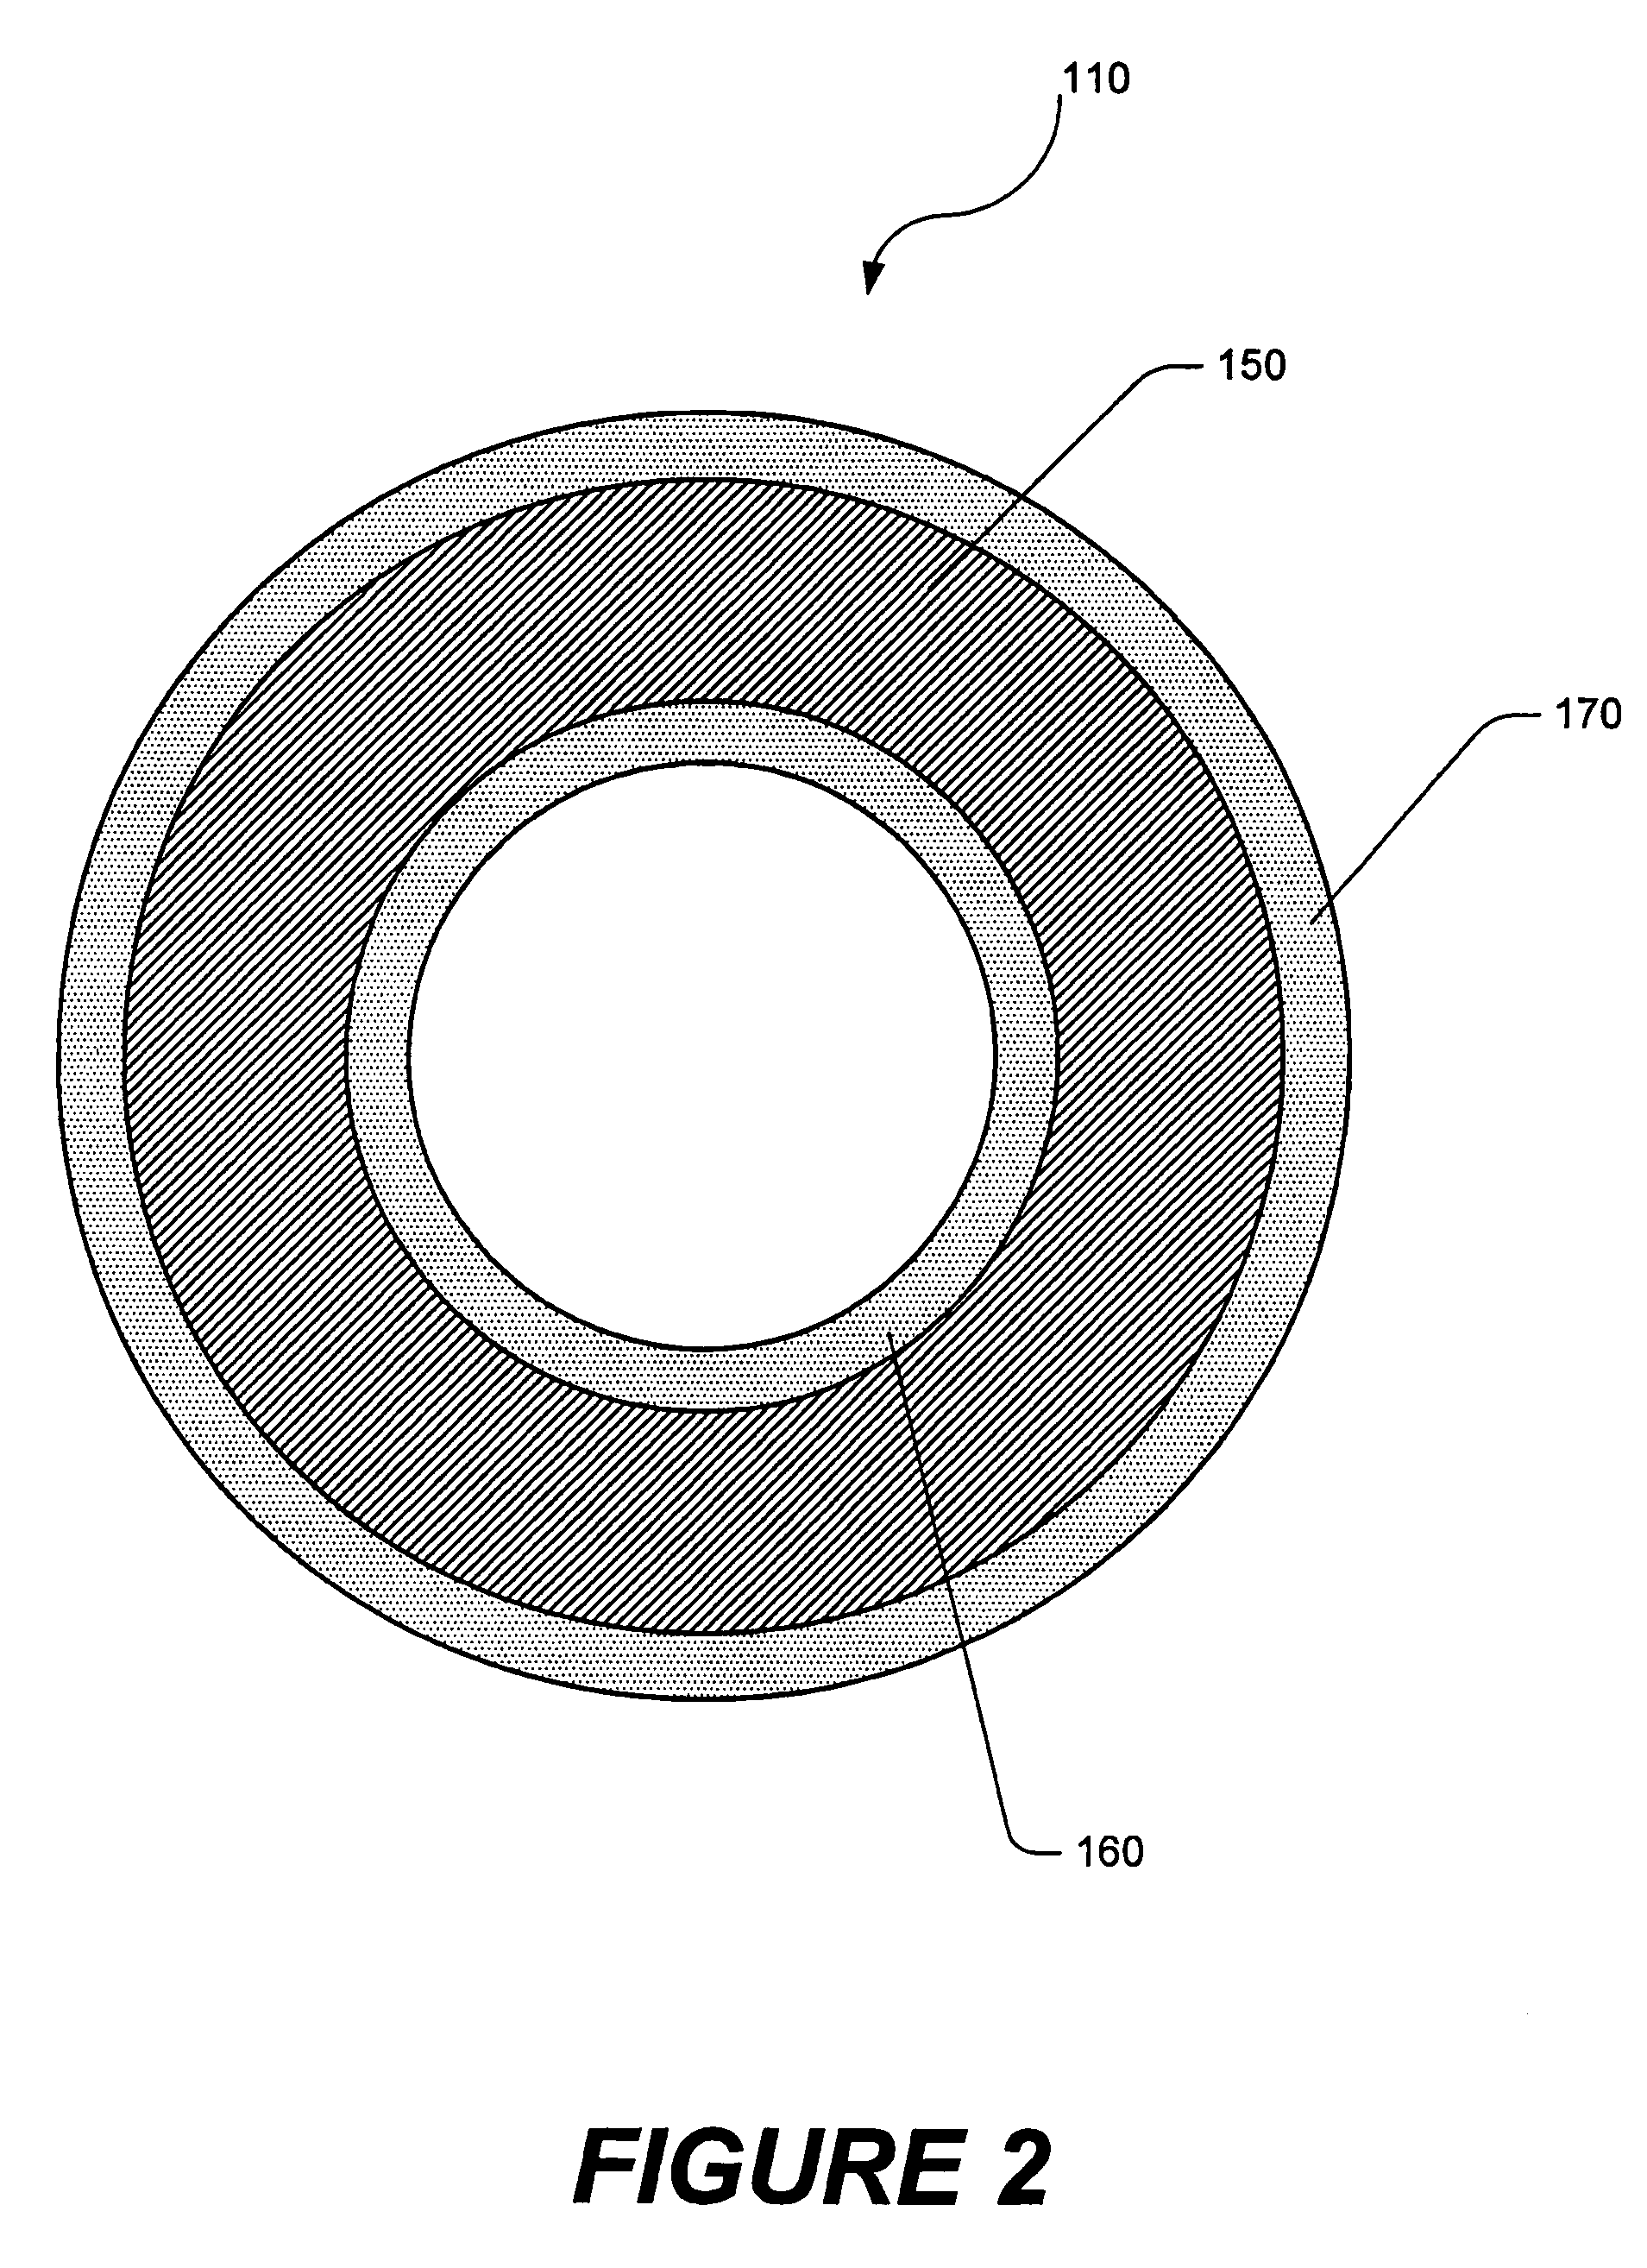 Casing comprising stress-absorbing materials and associated methods of use